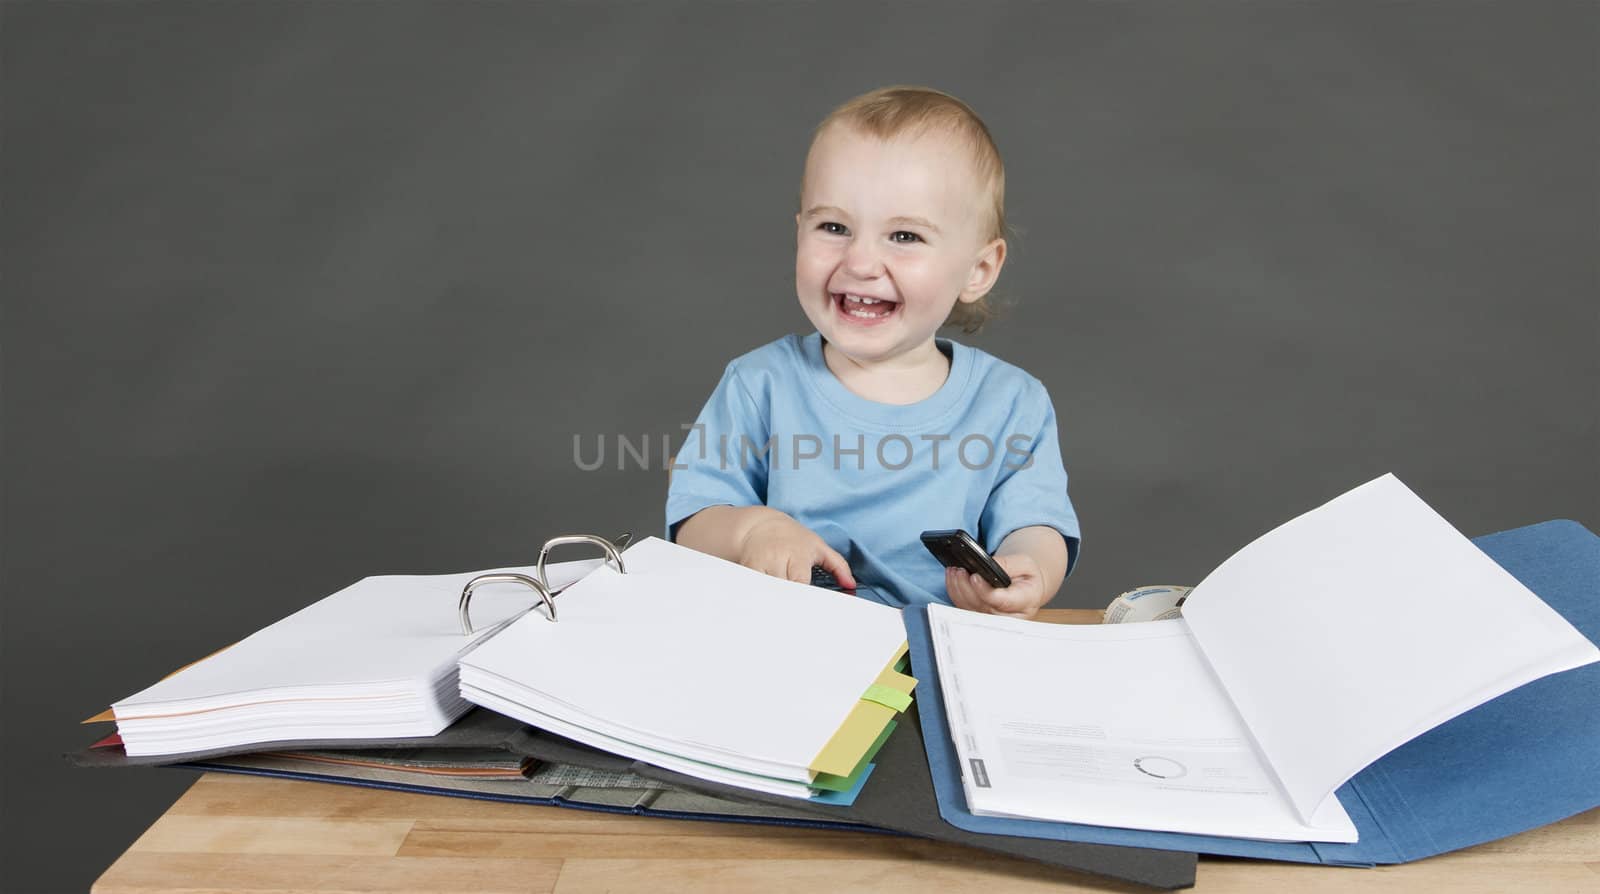 laughing child with paperwork at desk in grey background